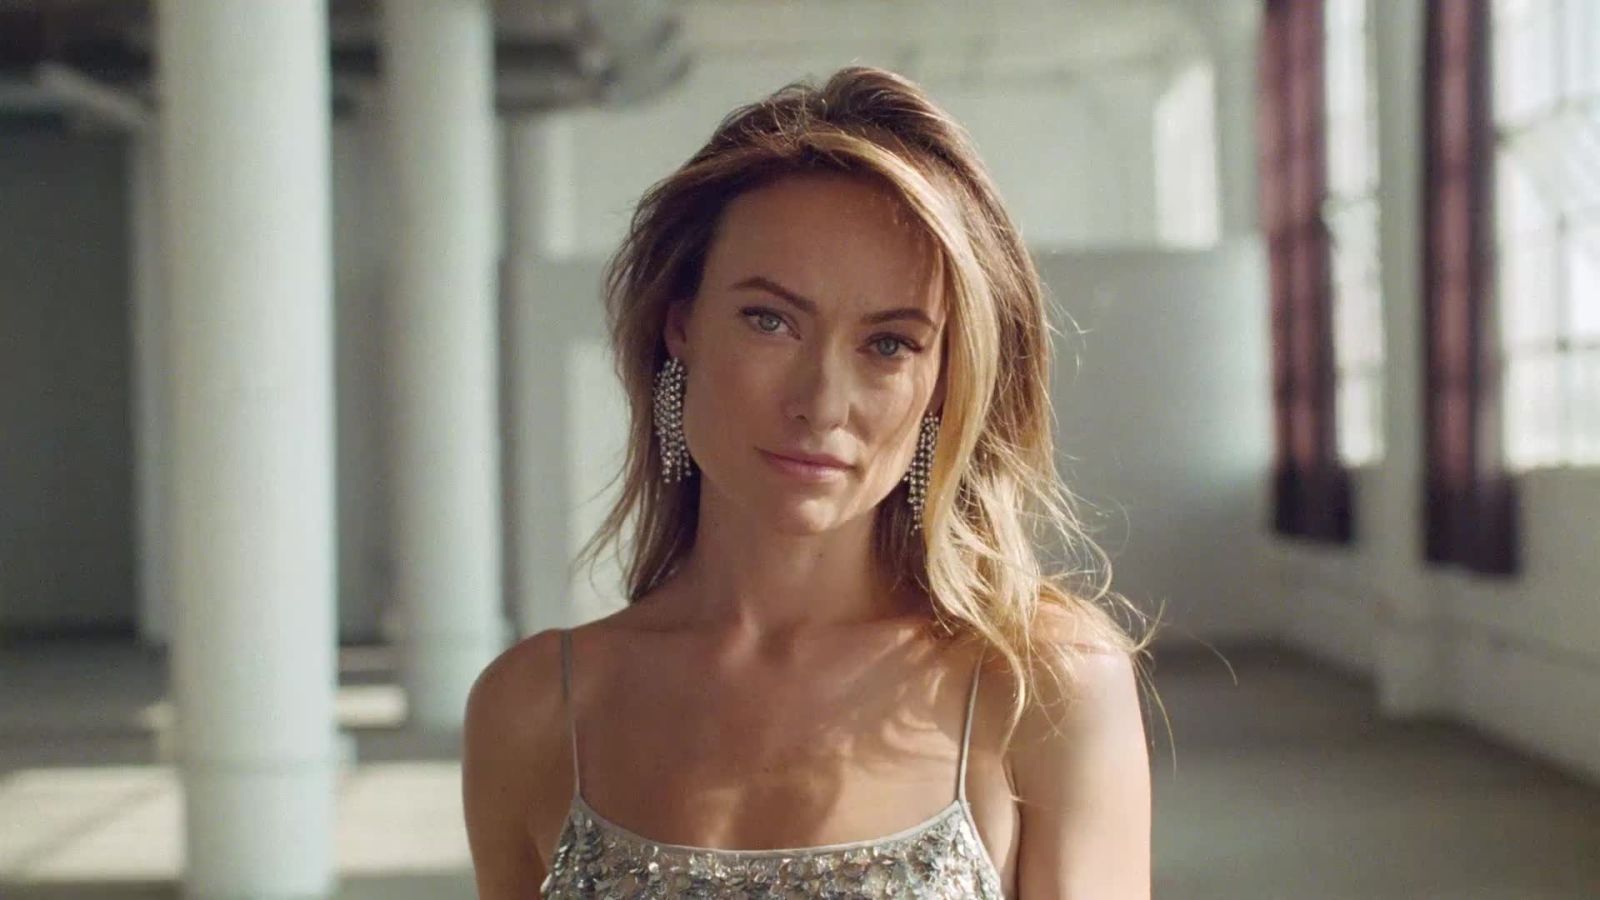 Watch Olivia Wilde Direct Herself in Her Vogue Cover Video